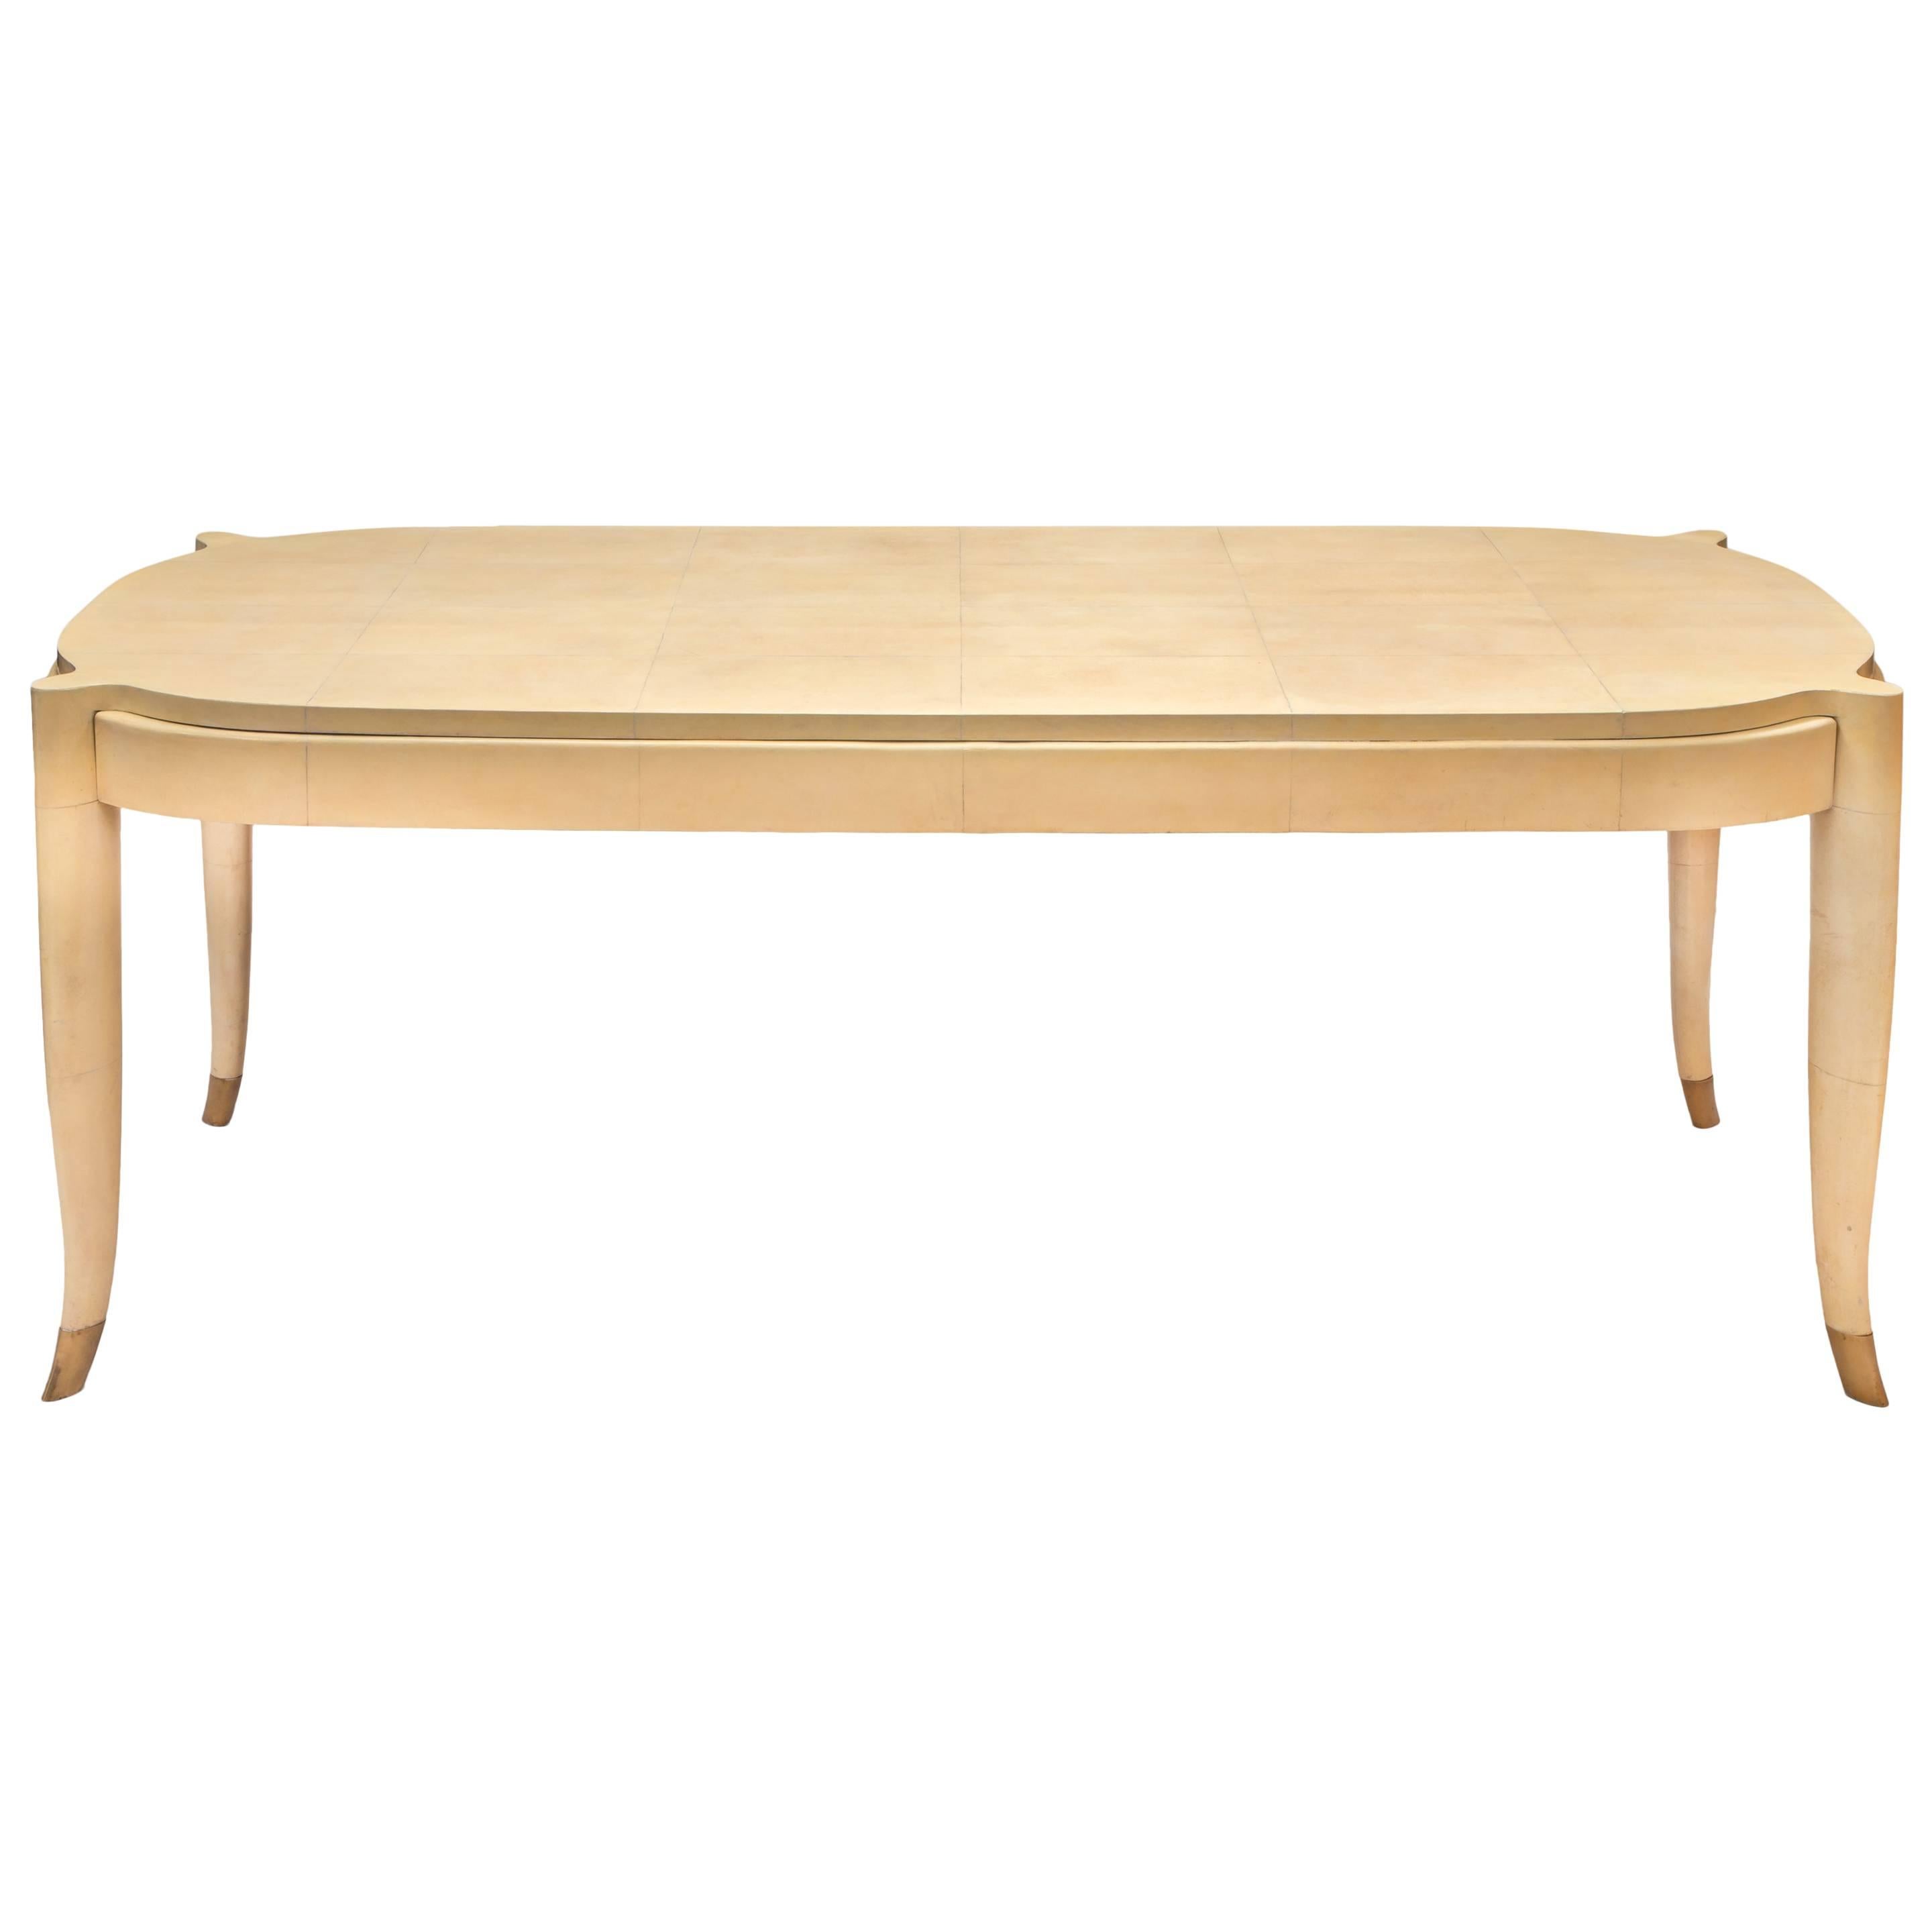 Guglielmo Ulrich Attributed, Rare Parchment & Brass Center / Dining Table / Desk For Sale